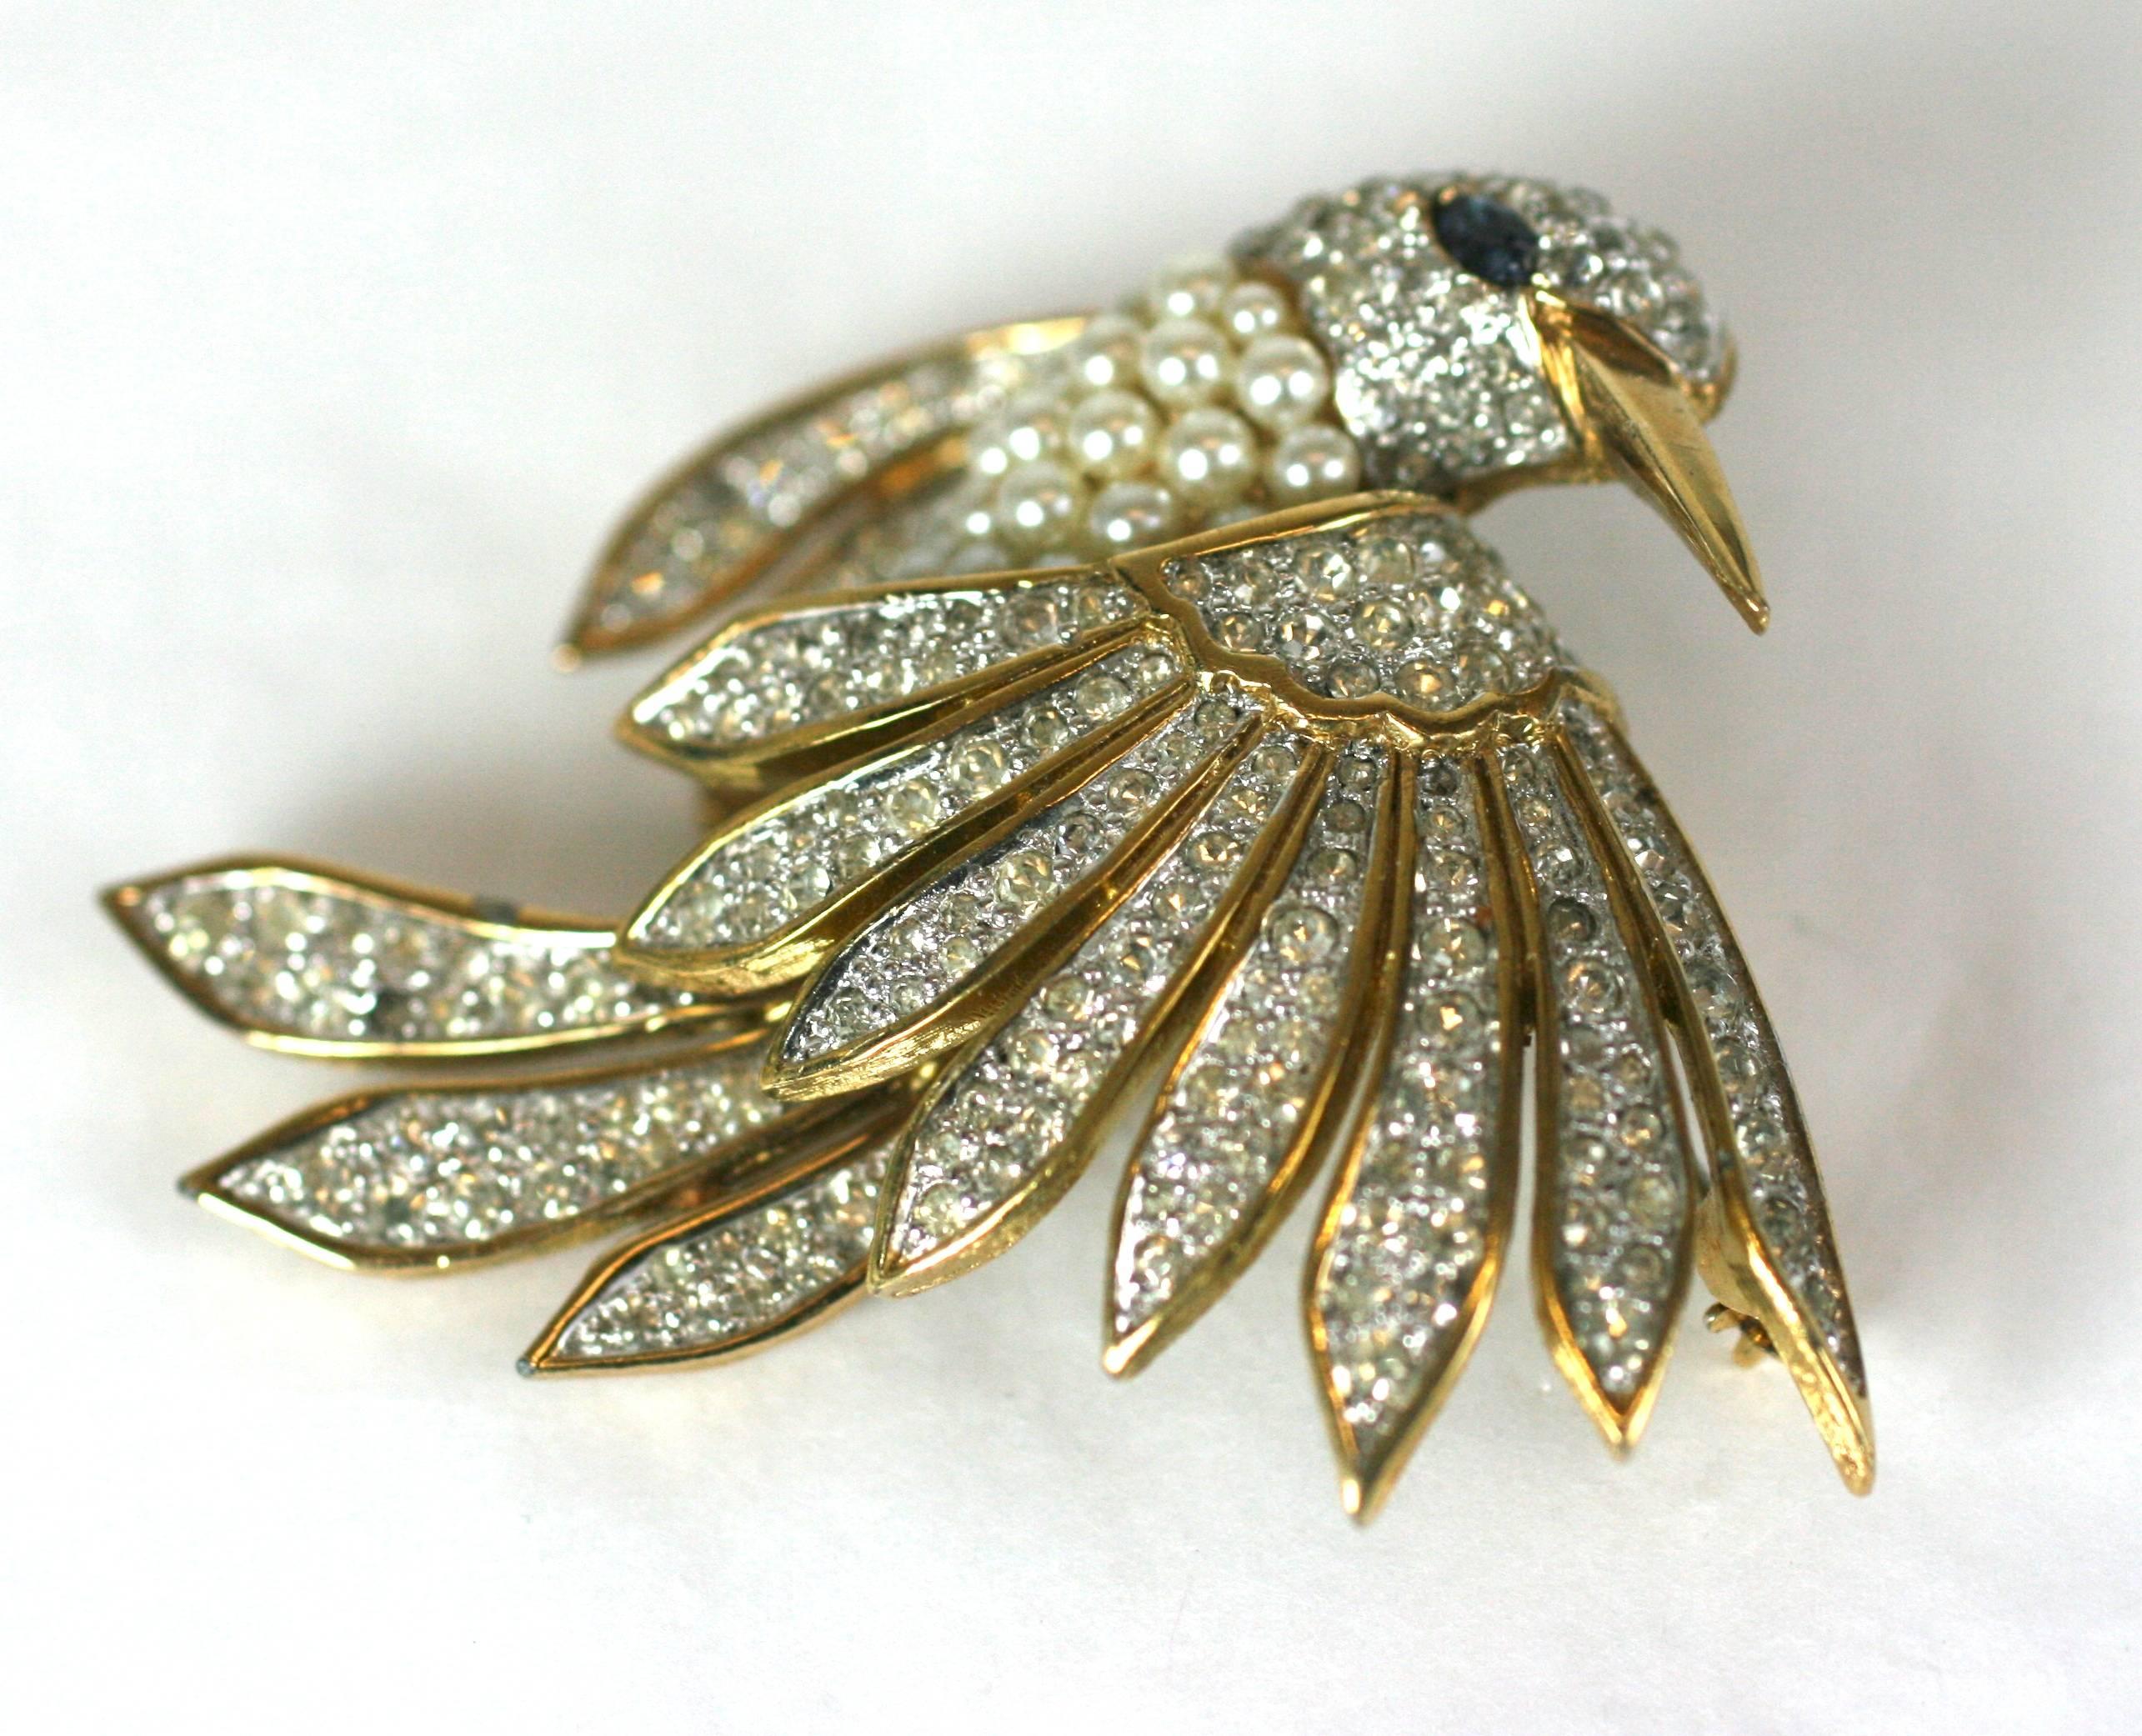 Pearl Studded Jomaz Bird with pave crystal set wings. Dimensional bird in flight with faux sapphire marquise eye. Jomaz is the later incarnation of the Joseph Mazer company which produced some of the highest quality faux jewels thoughout the 20th